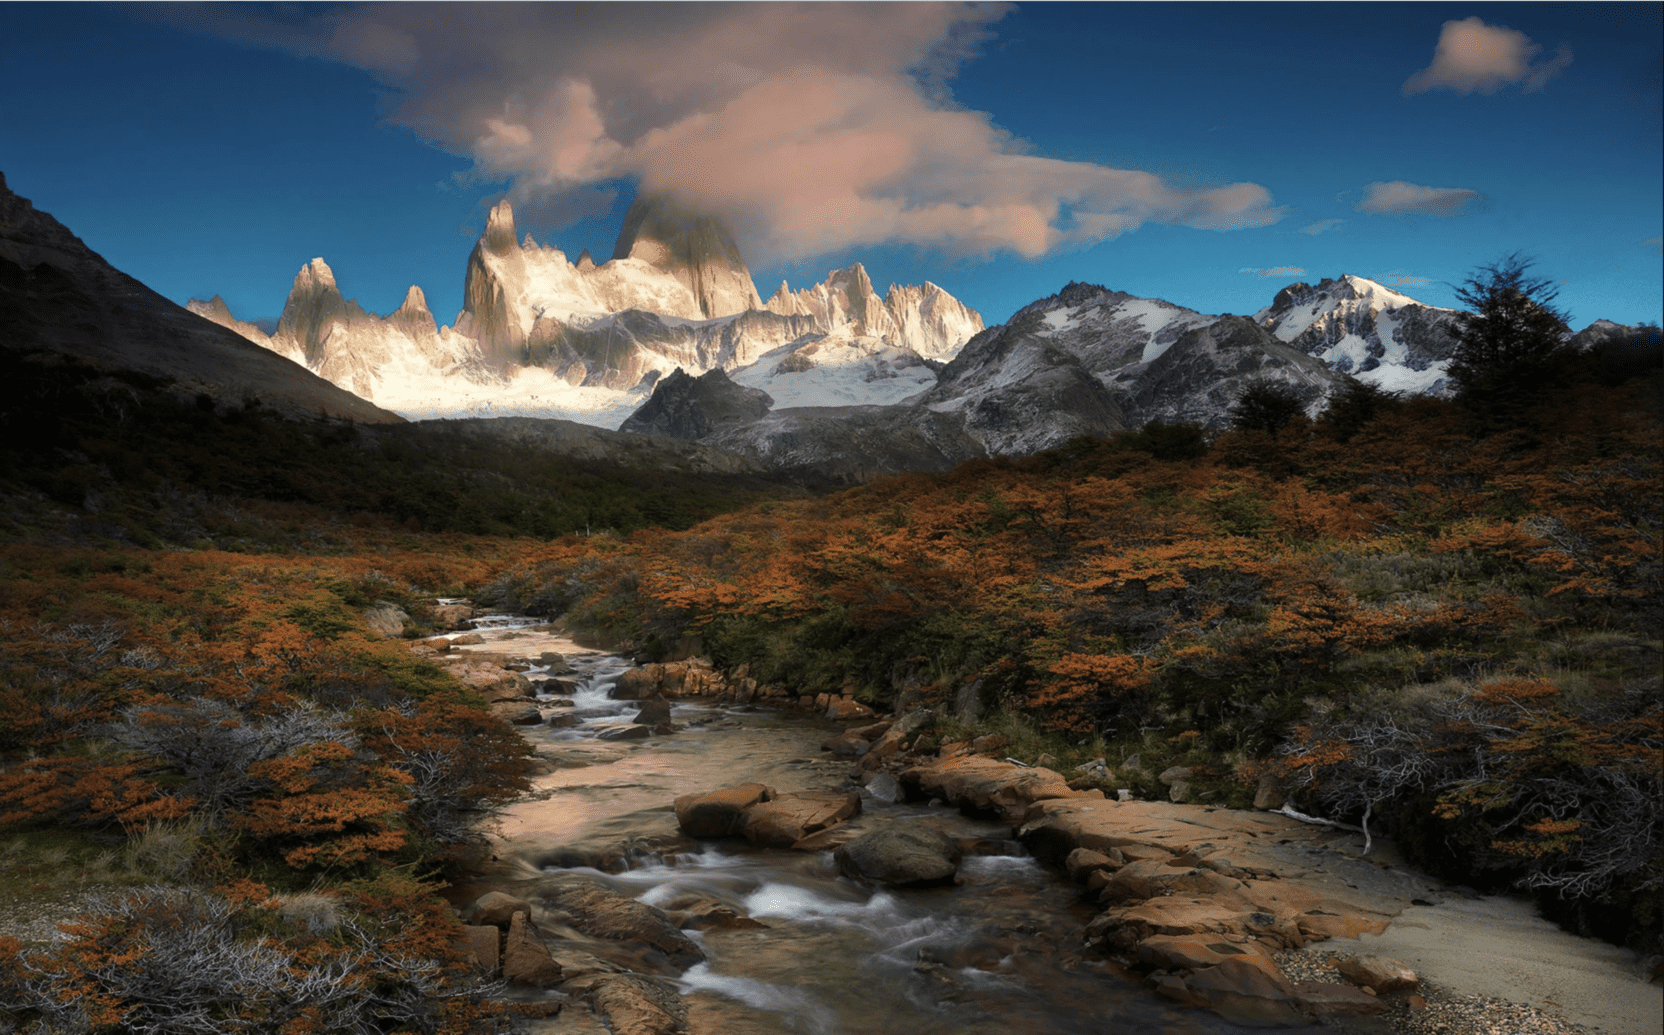 A creek running down the middle of a field with snow-capped mountains in the background